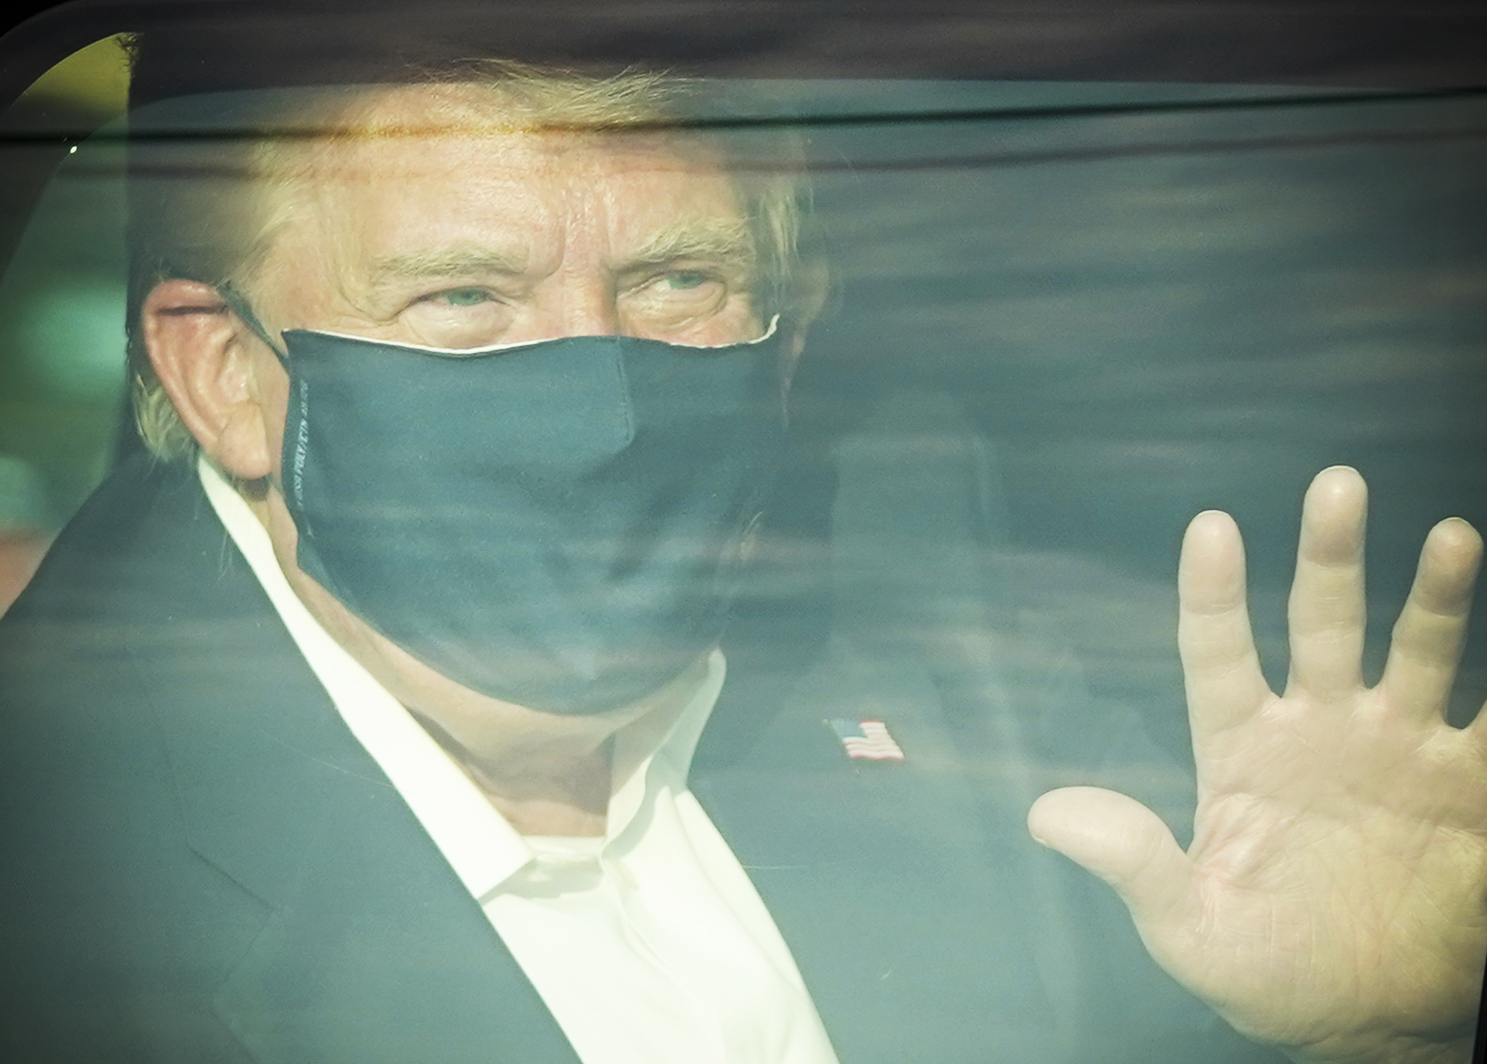 President Trump wearing a face mask inside his presidential limo.